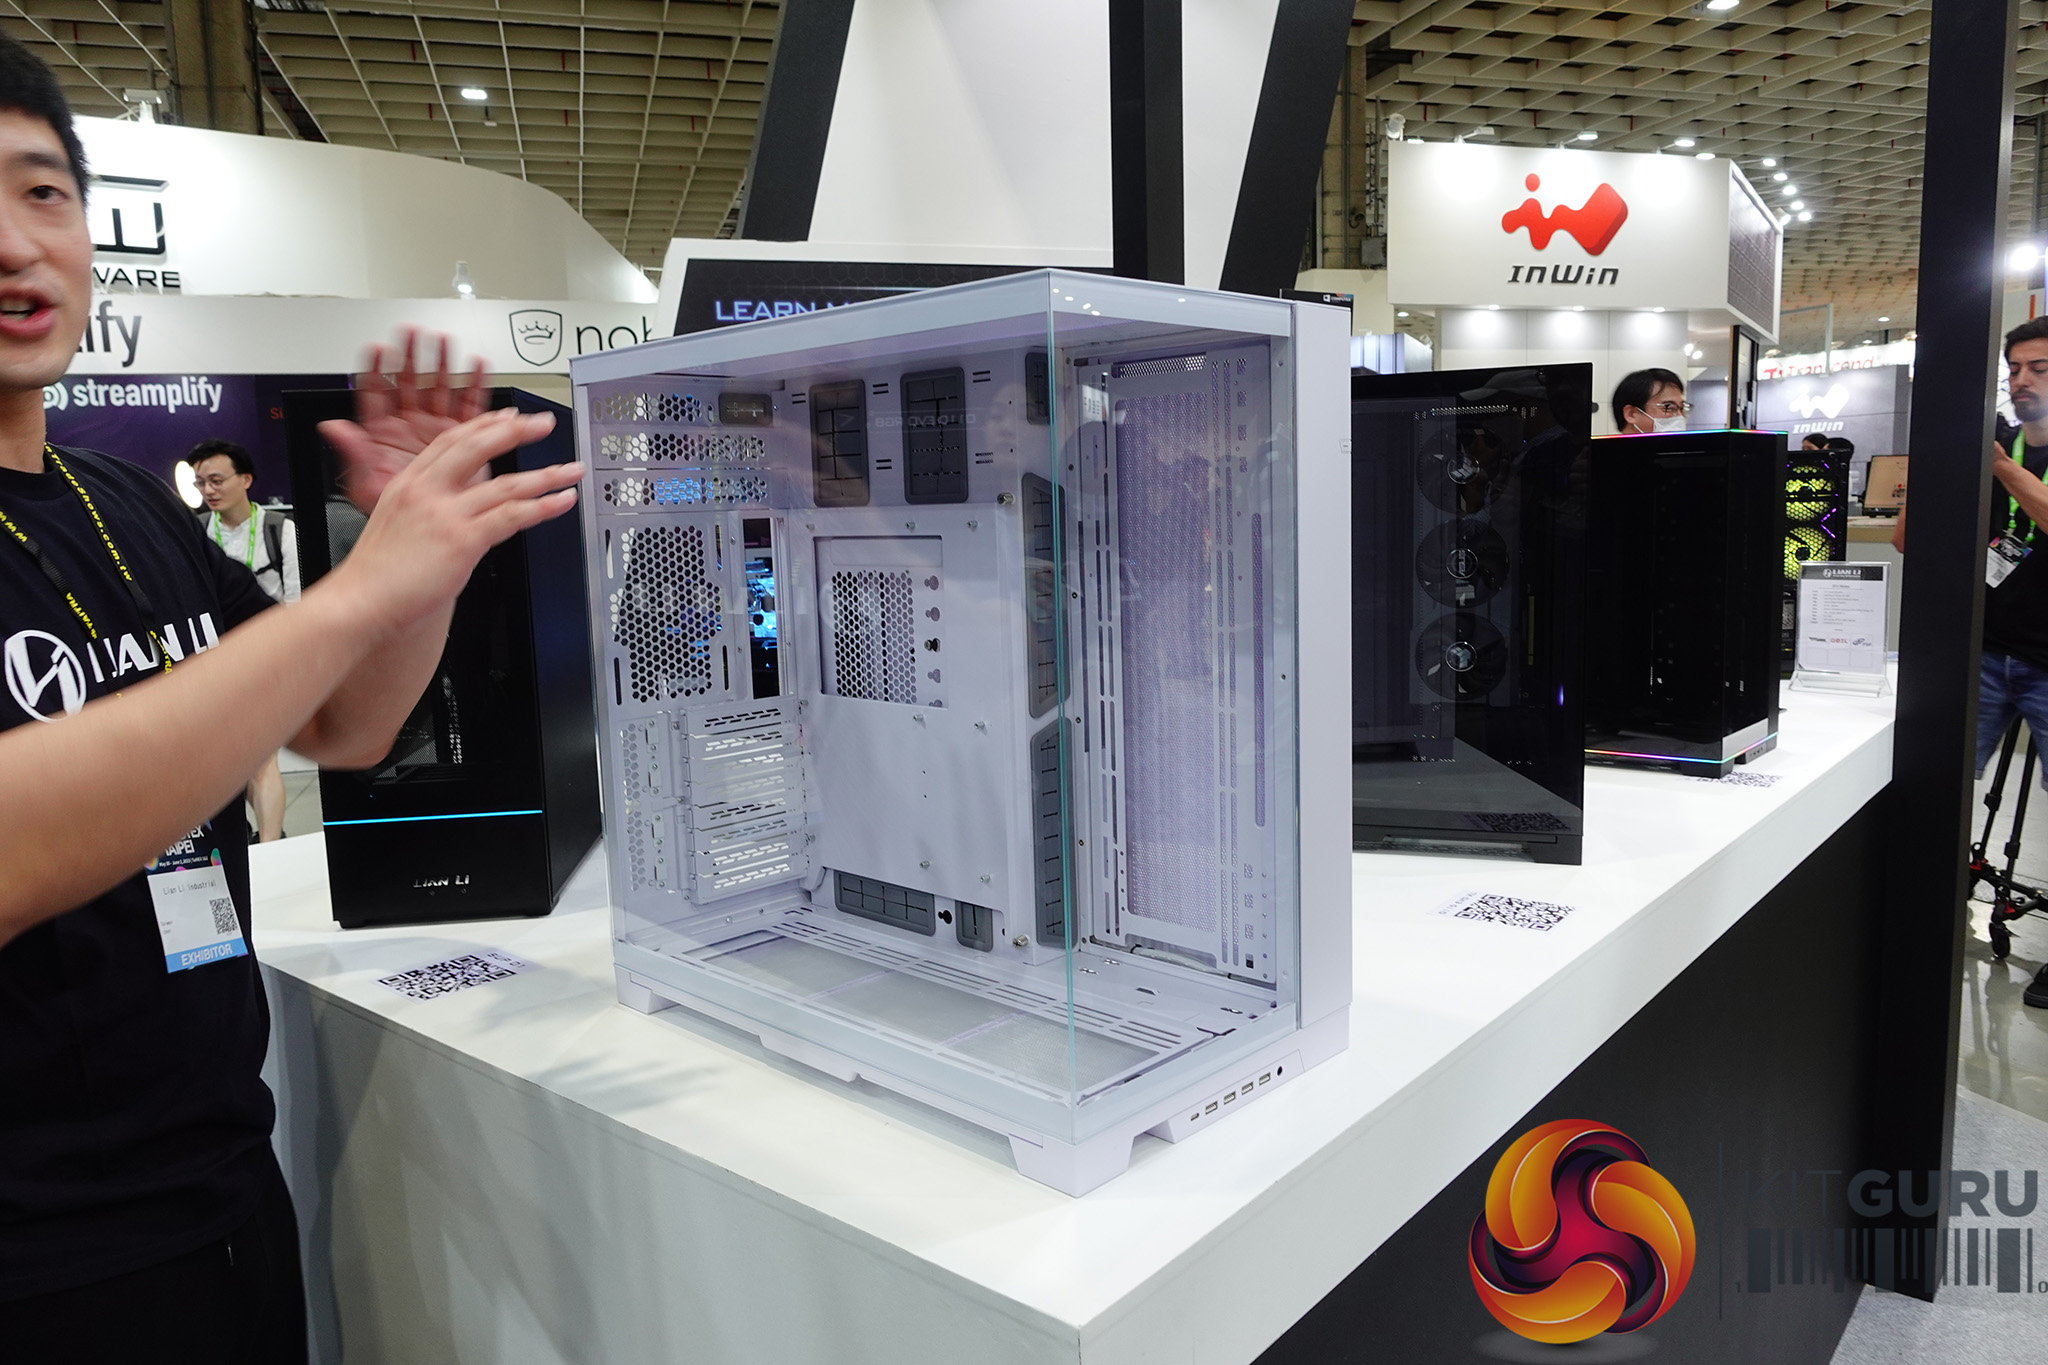 Lian Li has new cases, fans, and even a desk at Computex Taipei 2023